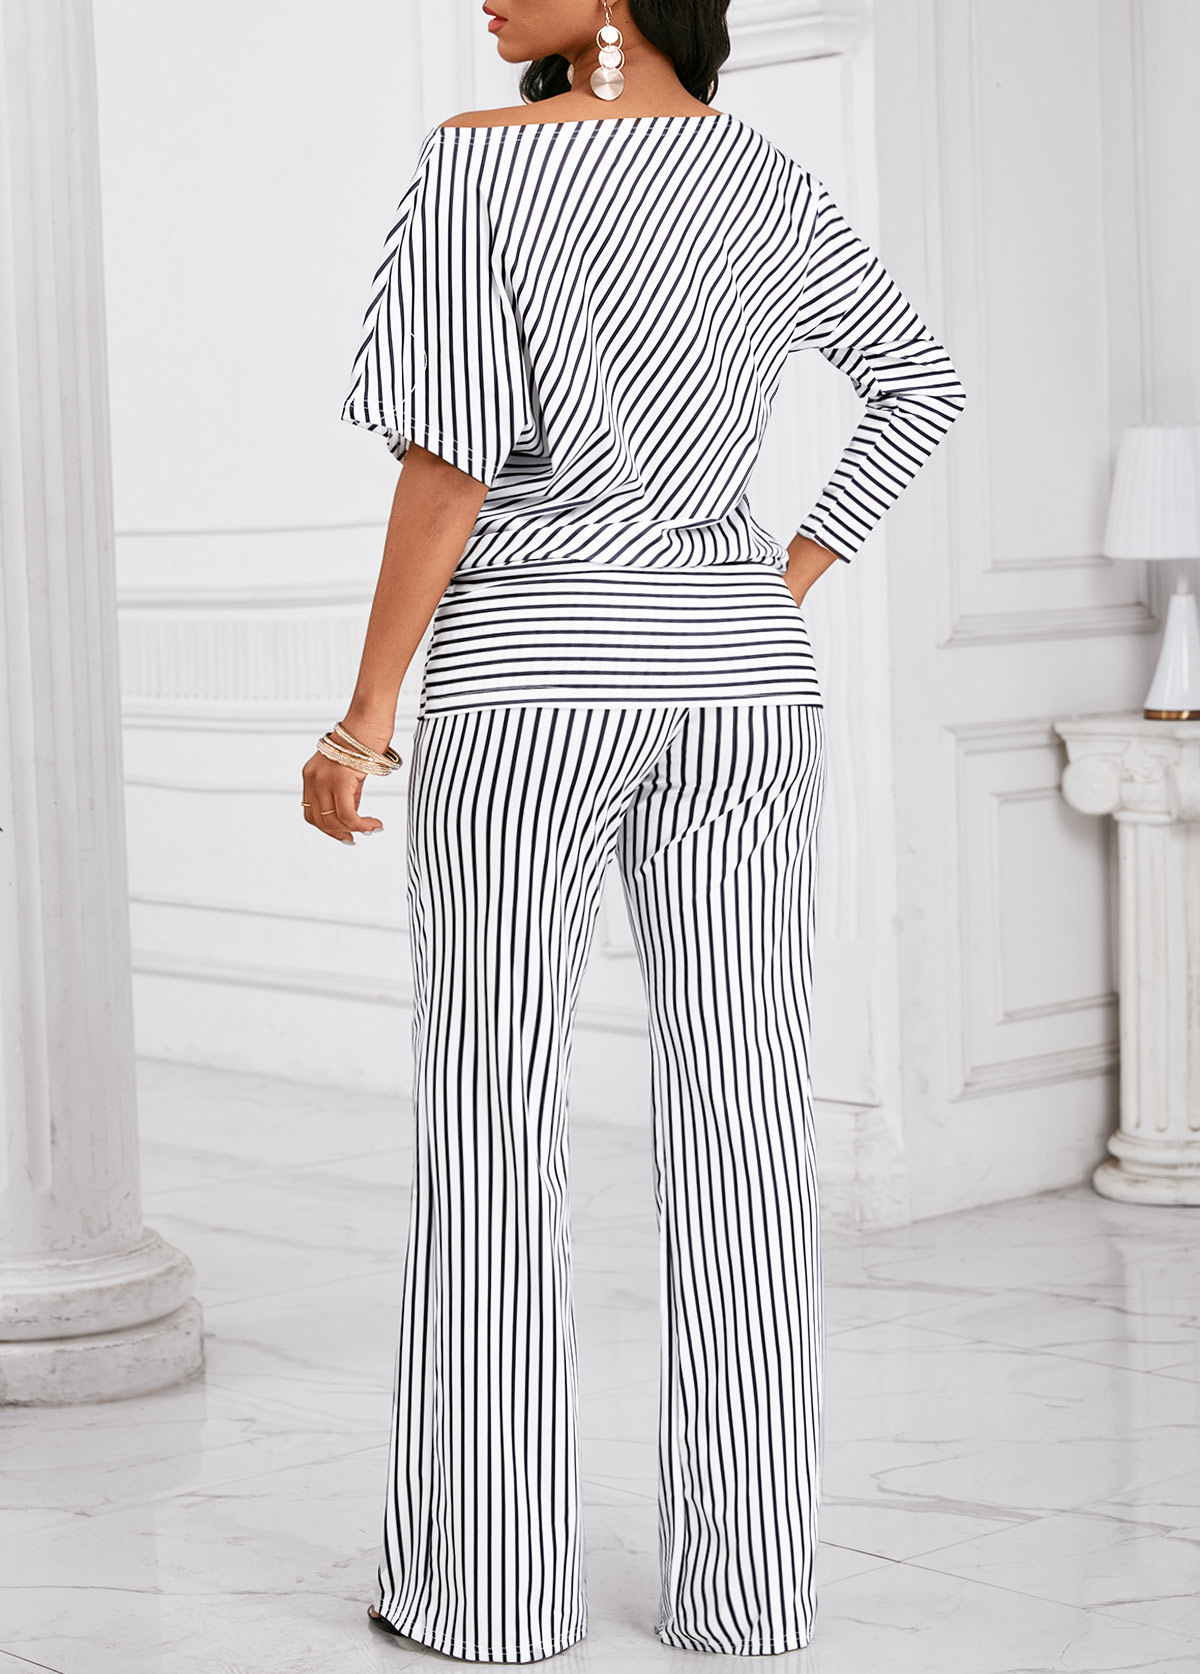 Black Asymmetry Striped Long 3/4 Sleeve Top and Pants